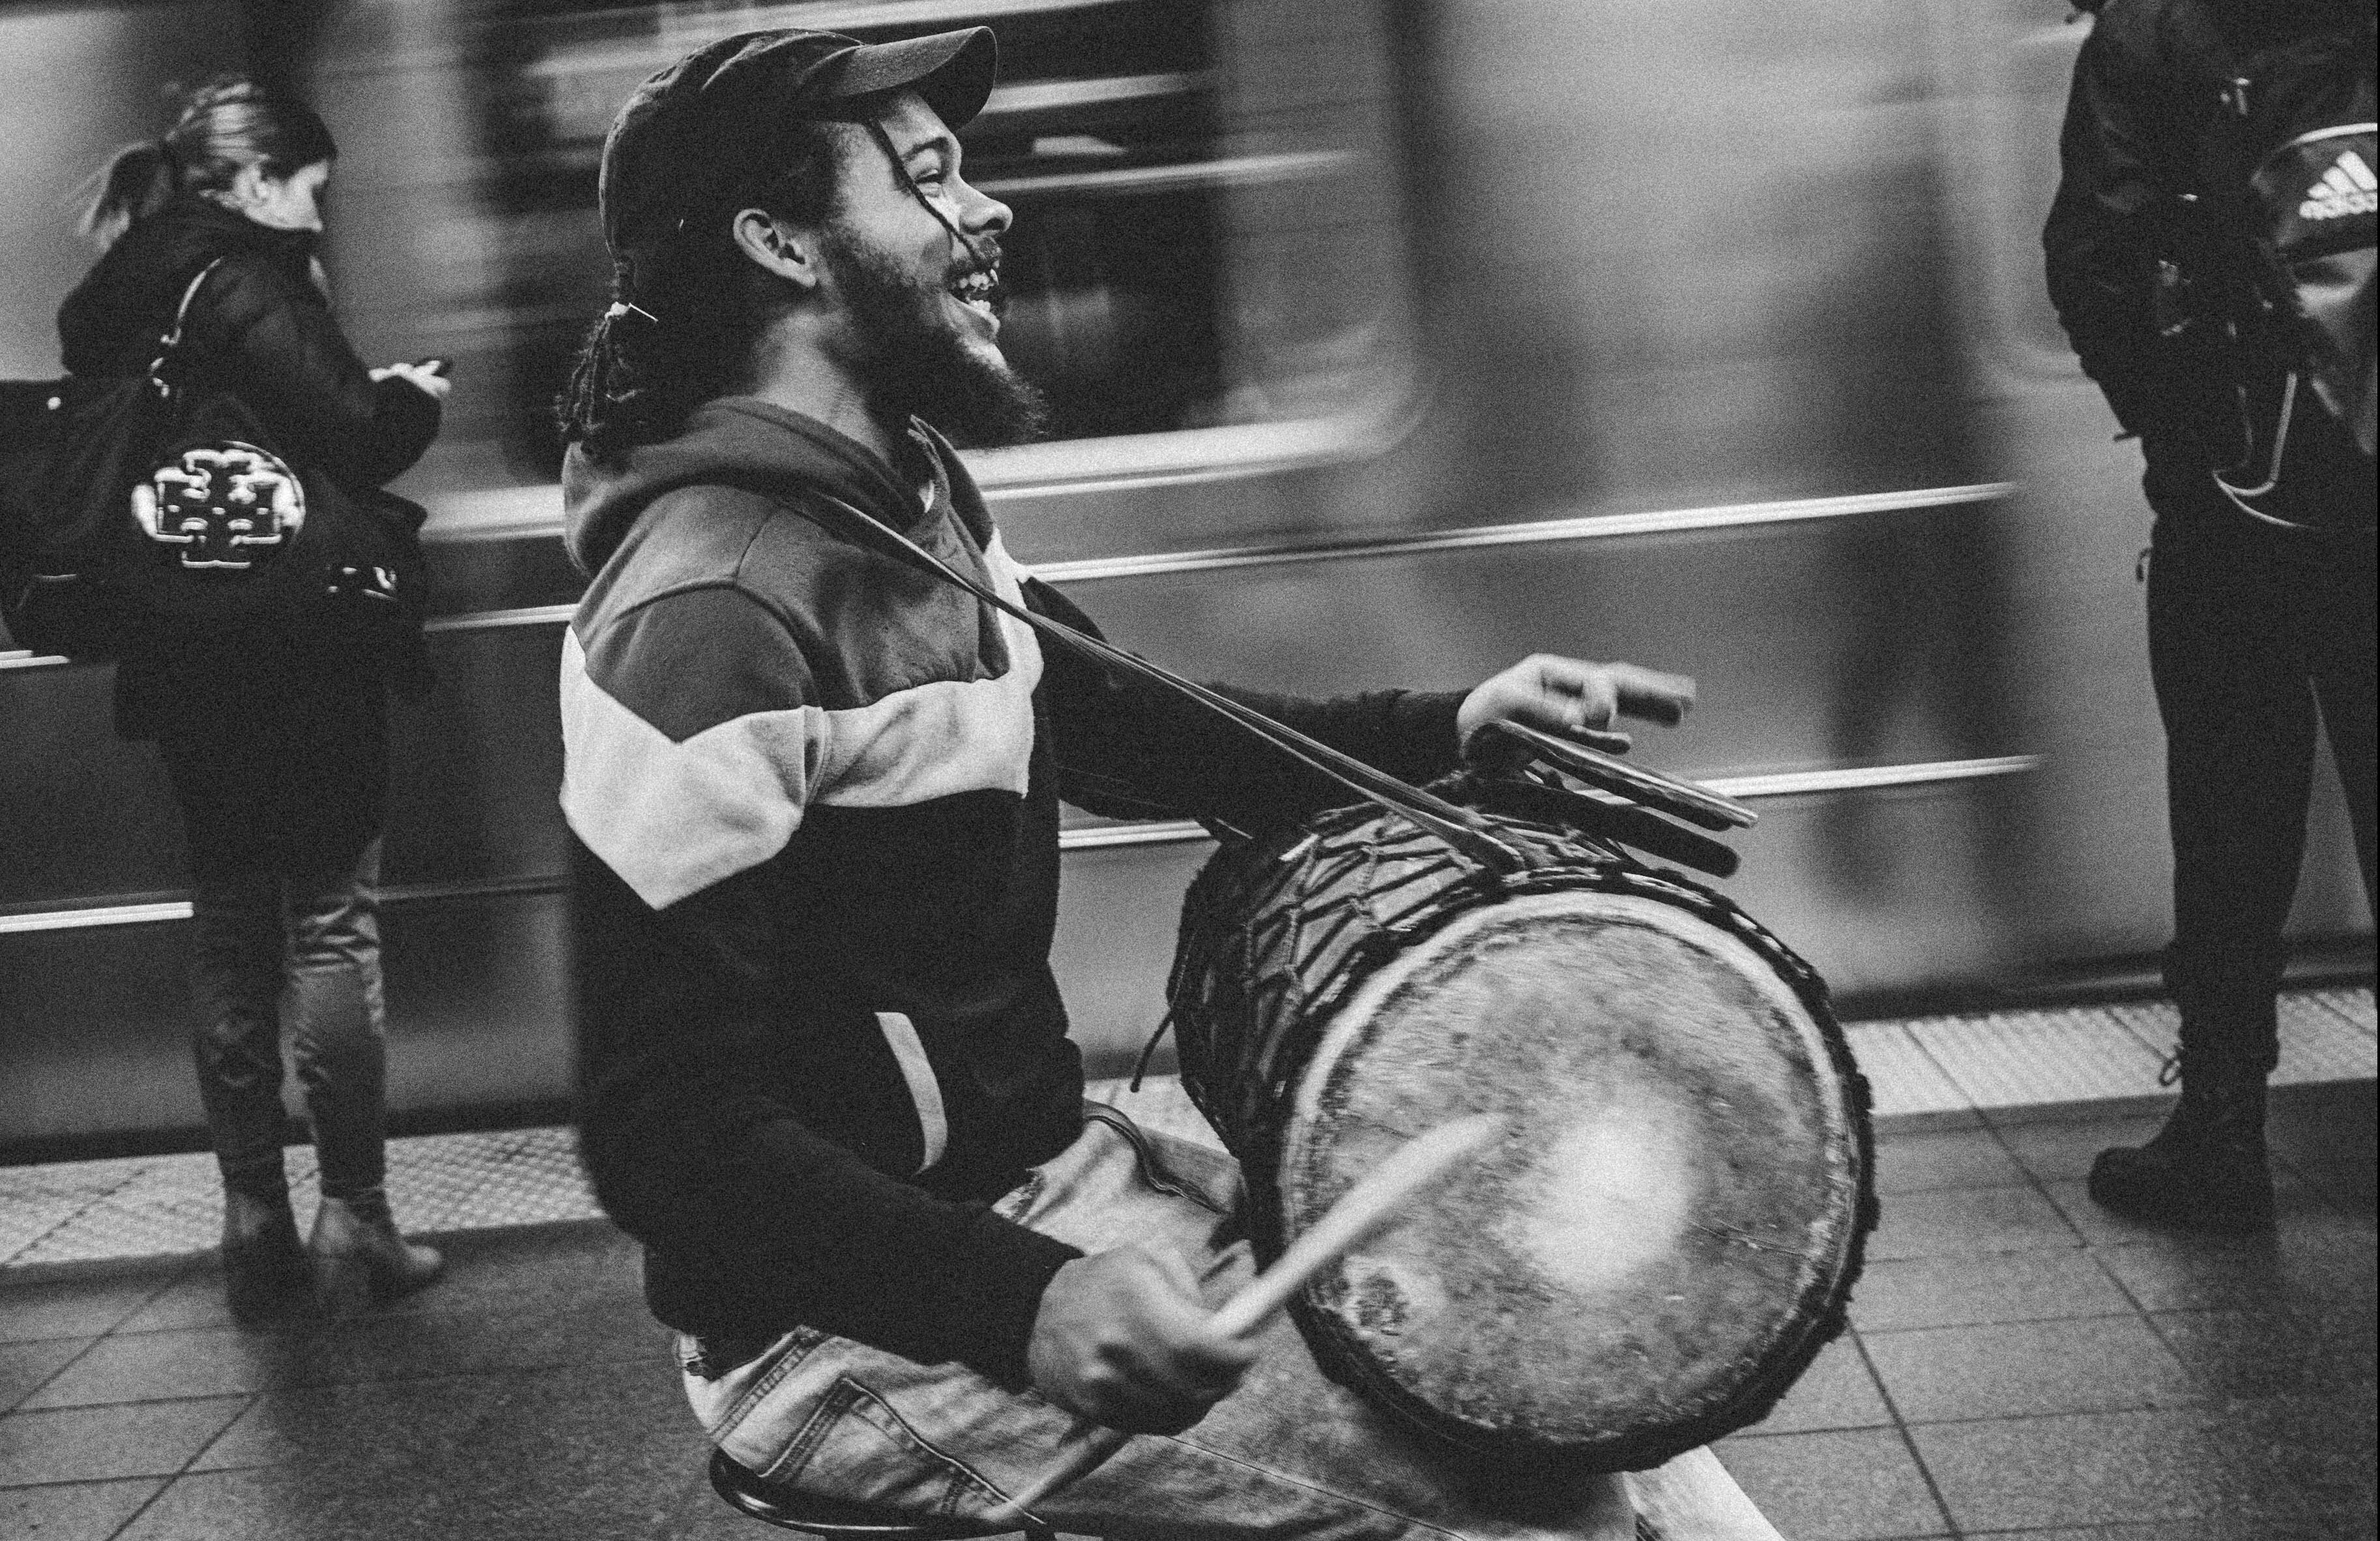 Urban Youth Use Myths and Drums to Become Men - Florian Schneider